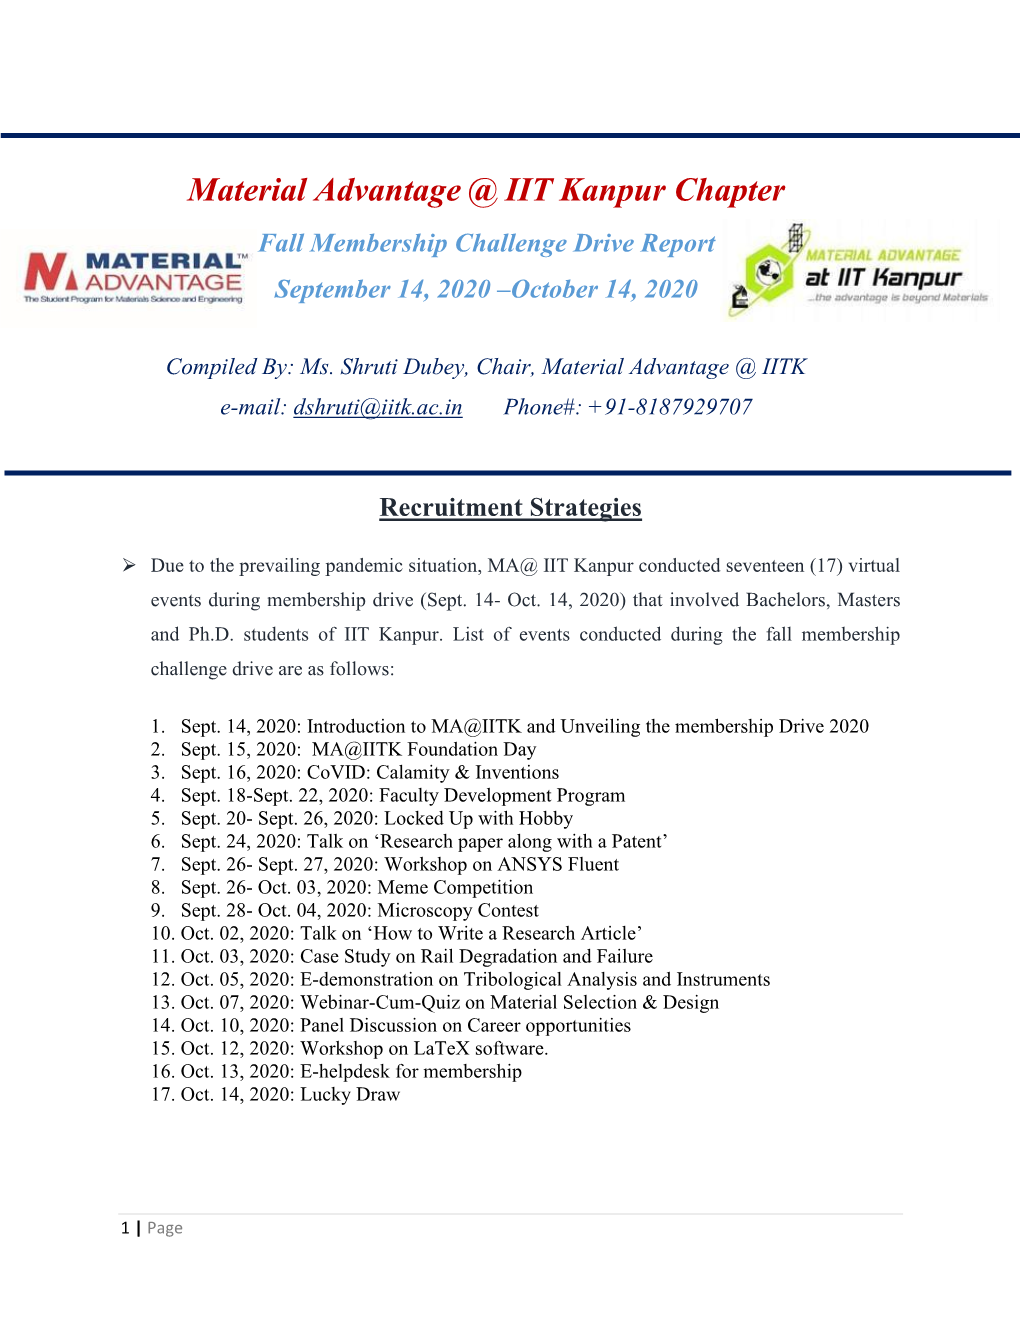 Material Advantage @ IIT Kanpur Chapter Fallmaterial Membership Challenge Drive Report September 14, 2020 –October 14, 2020